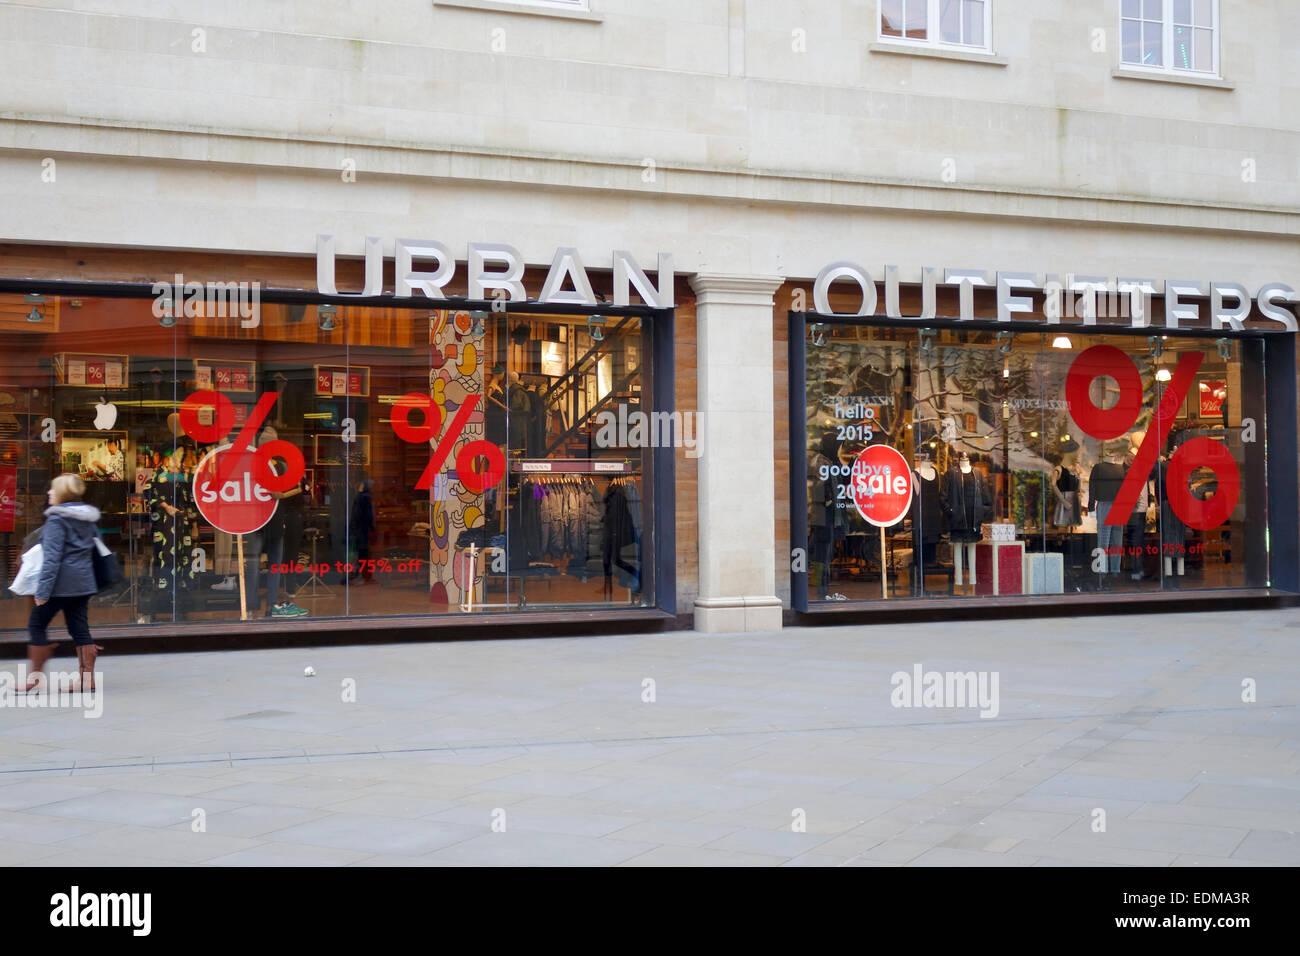 Urban Outfitters shop window displaying red % sale signs in Bath, England  Stock Photo - Alamy